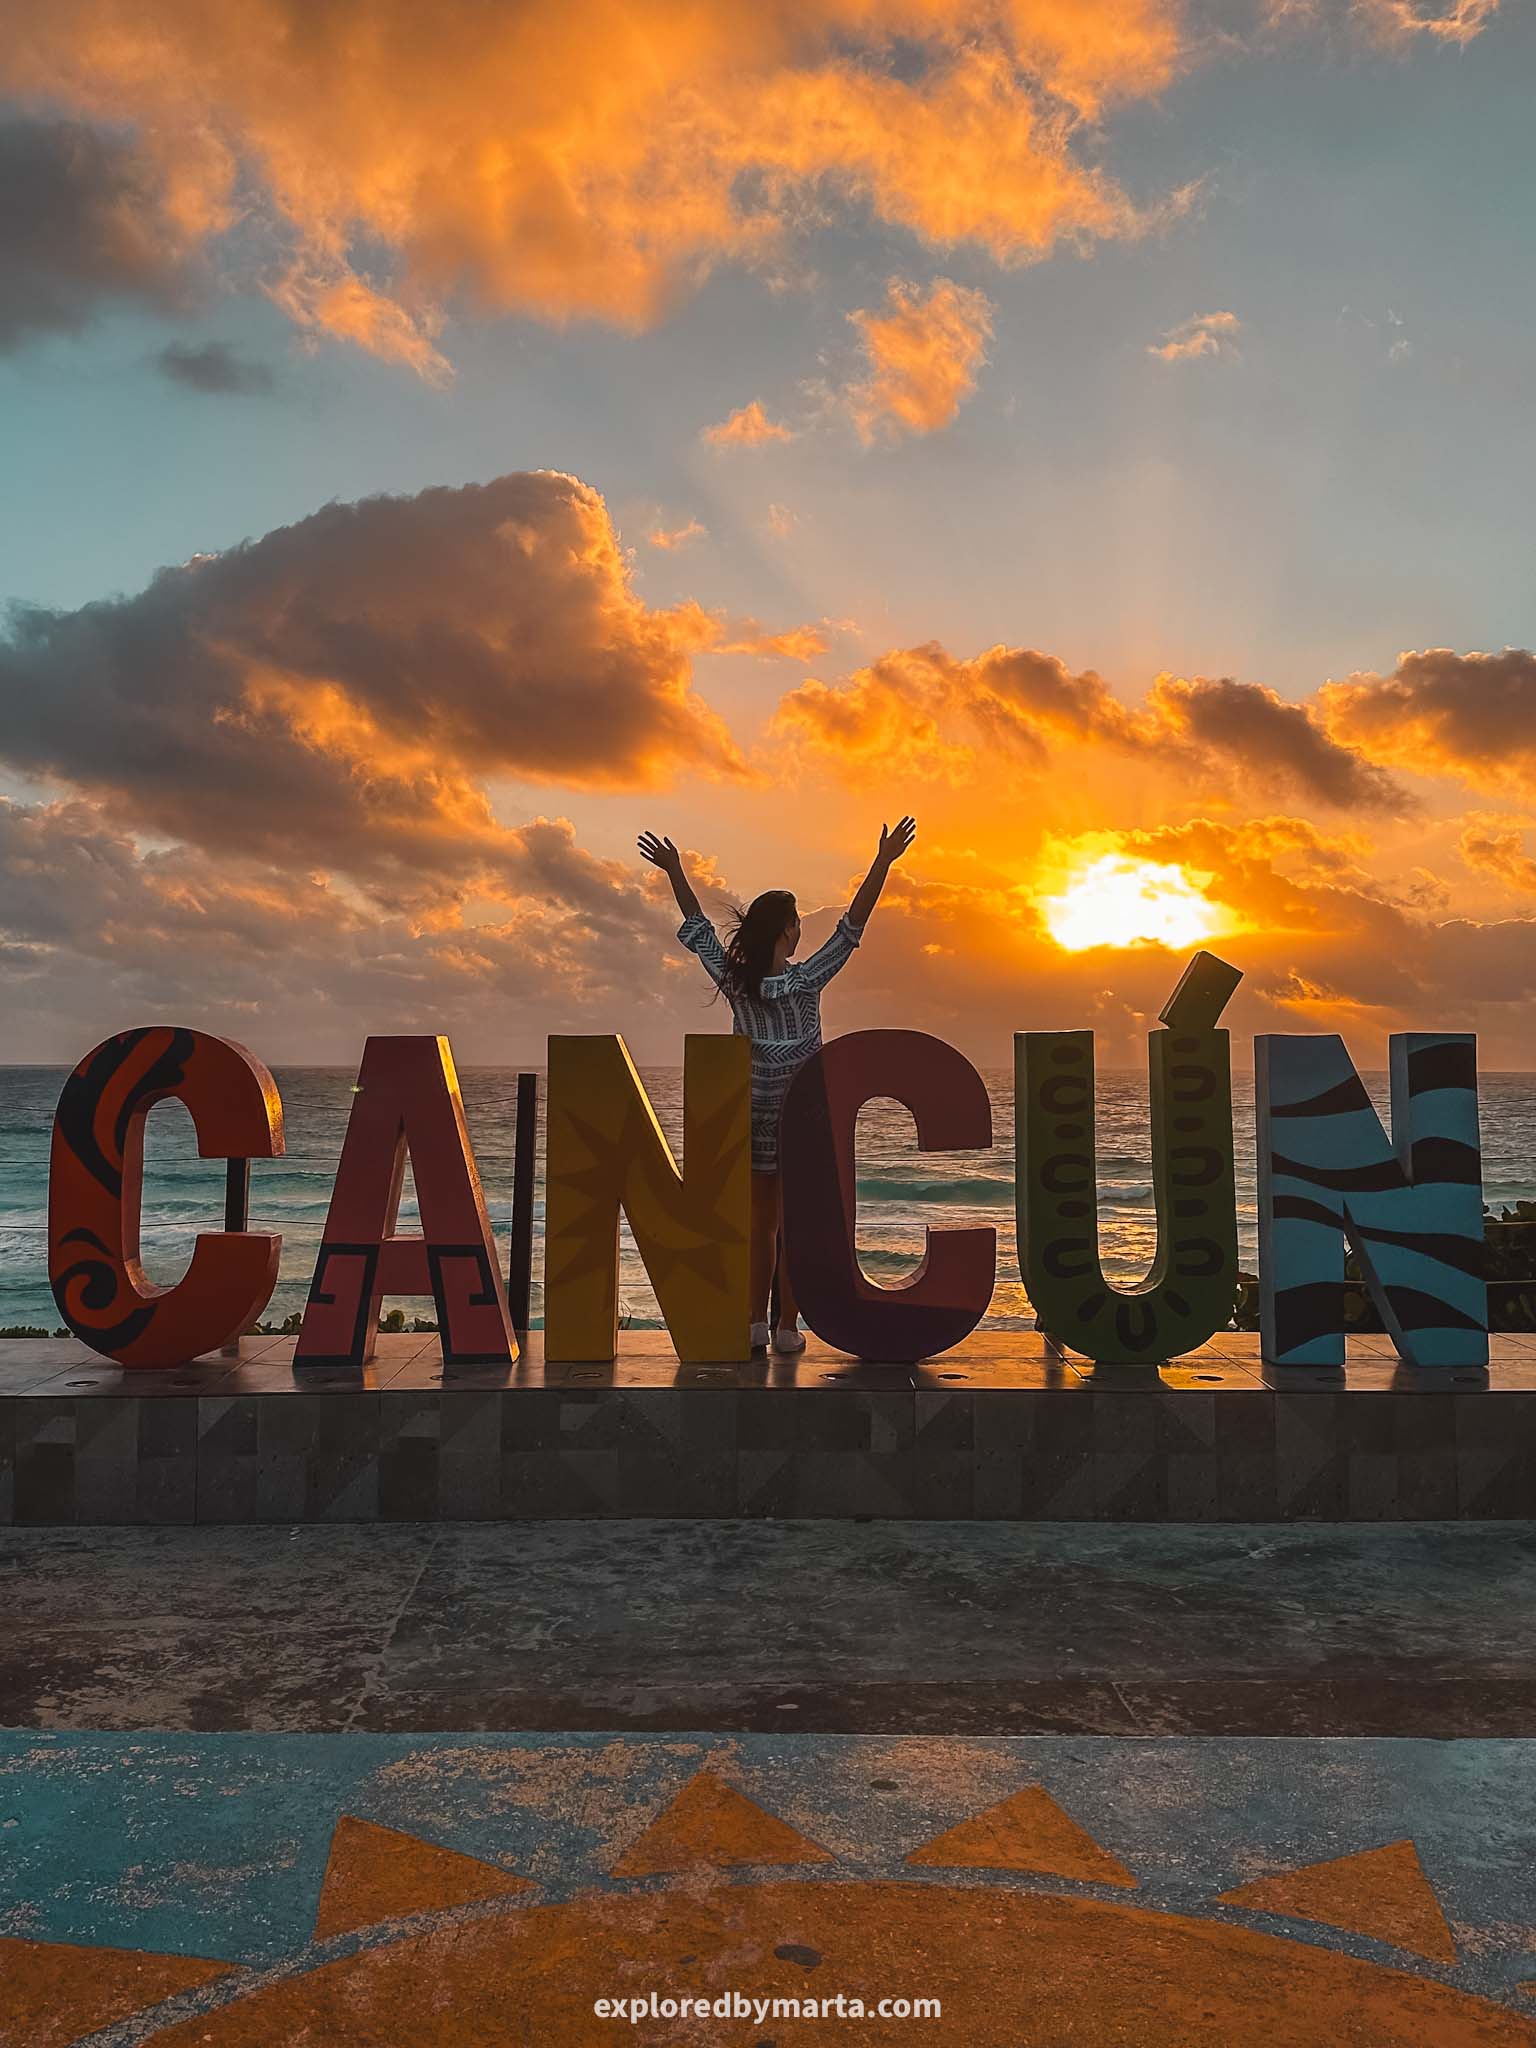 Cancun, Mexico - the colorful Cancun letters at Playa Delfines